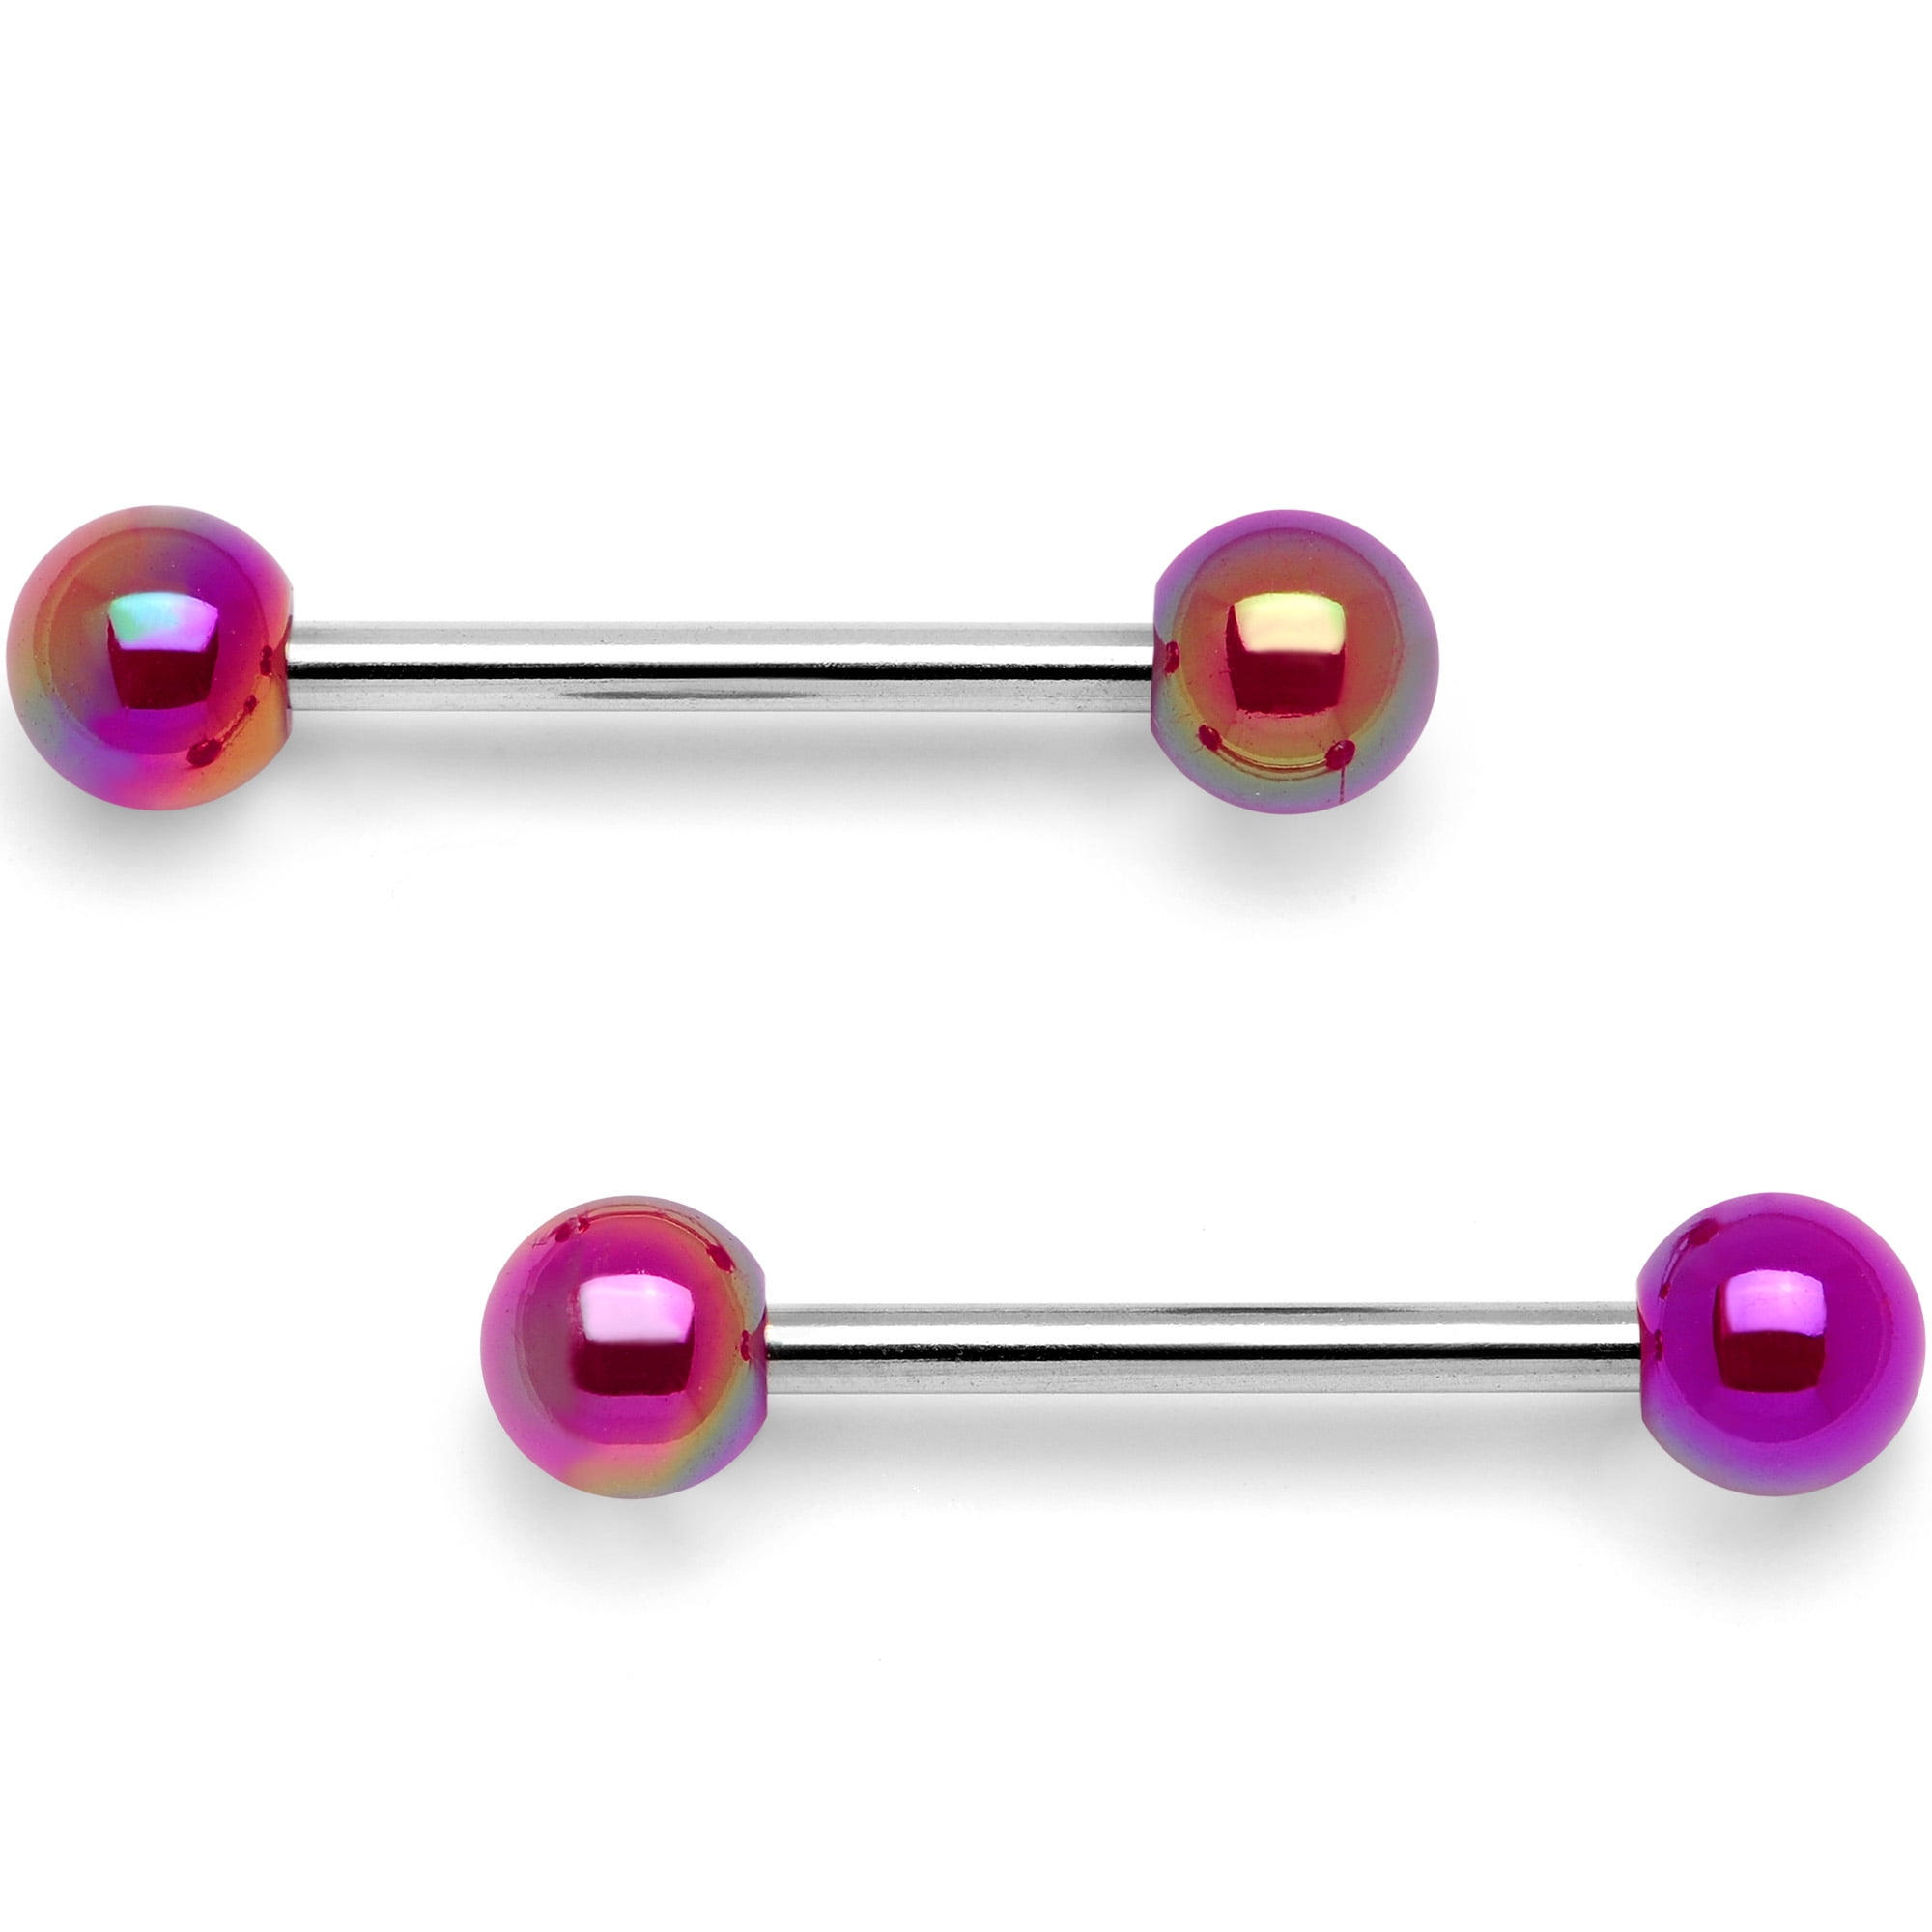 Body Candy Unisex 14G Nipplering Piercing Steel Pink Pearlescent Ball End 2Pc Nipple Ring Set 14mm